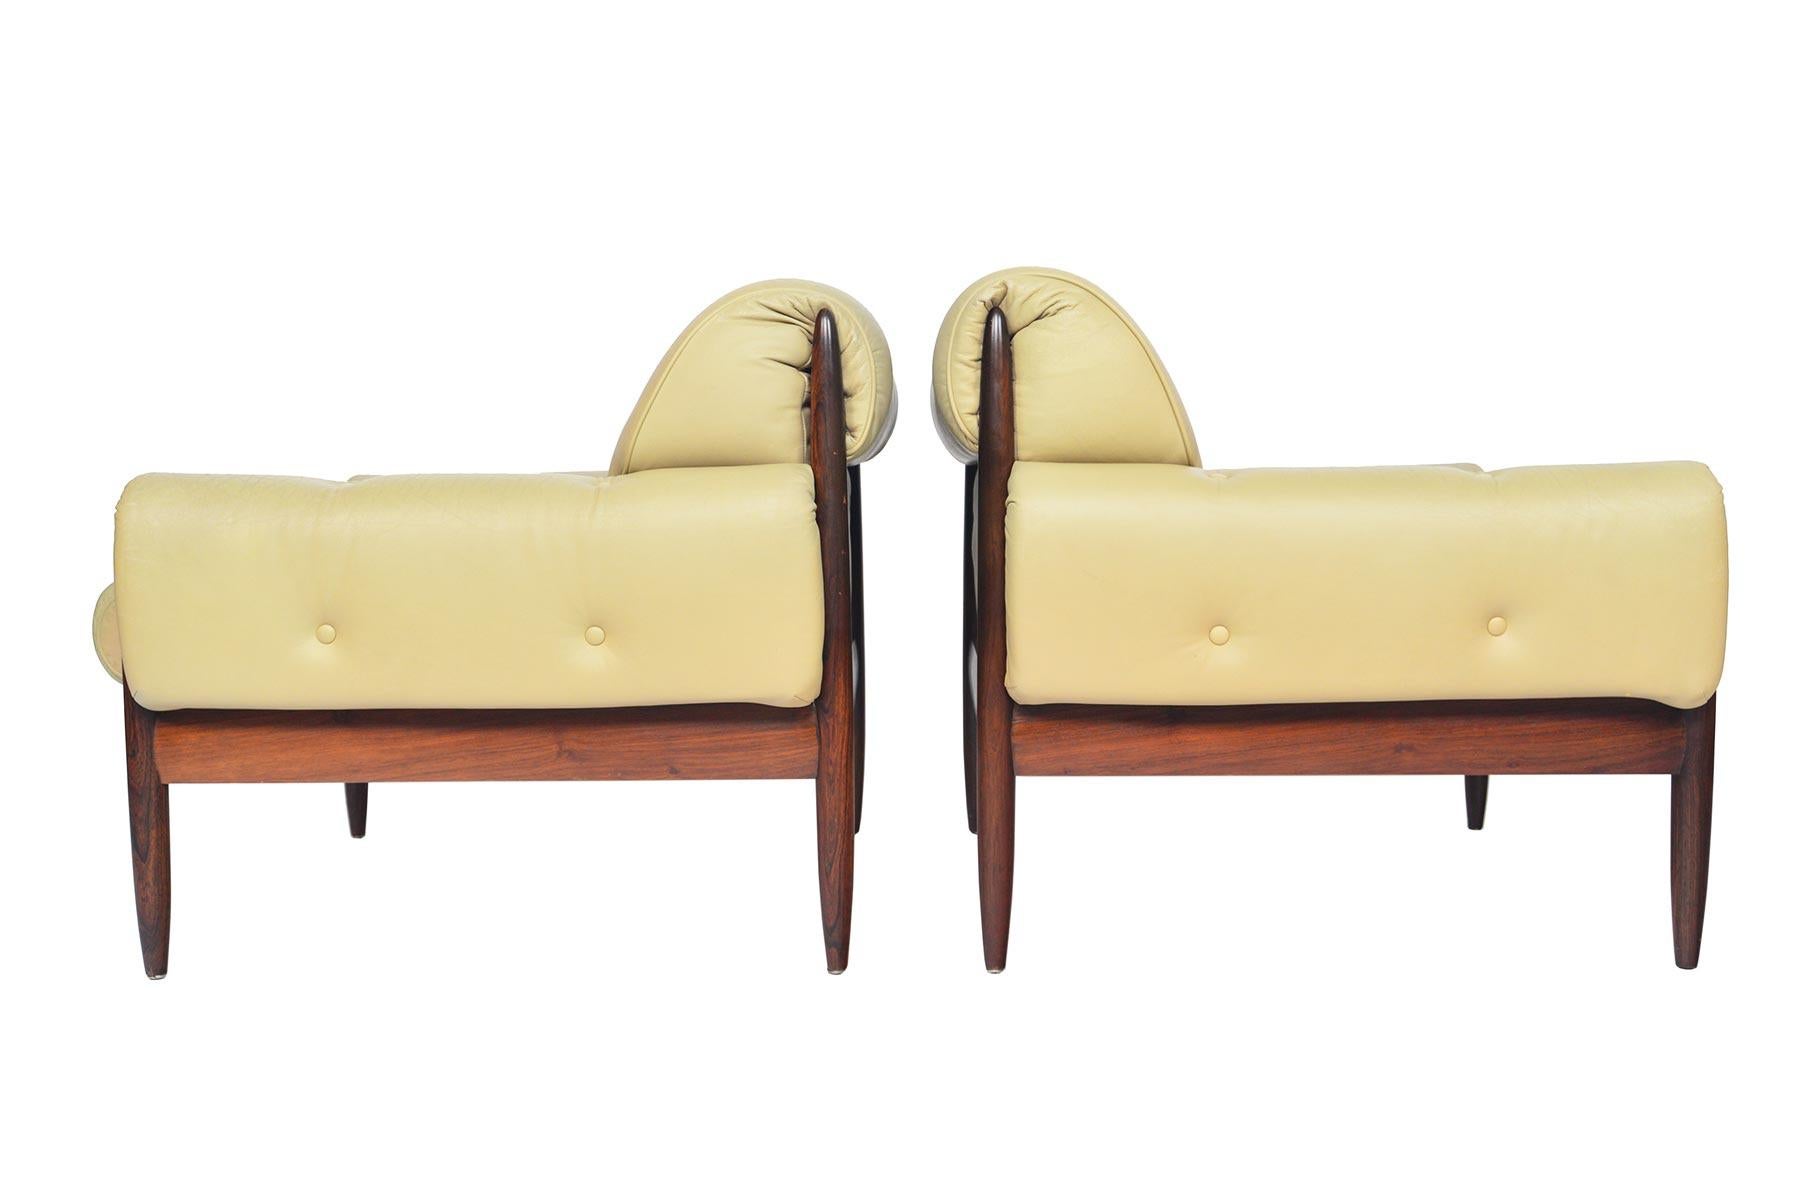 Scandinavian Modern Pair of Danish Modern Rosewood and Leather Lounge Chairs